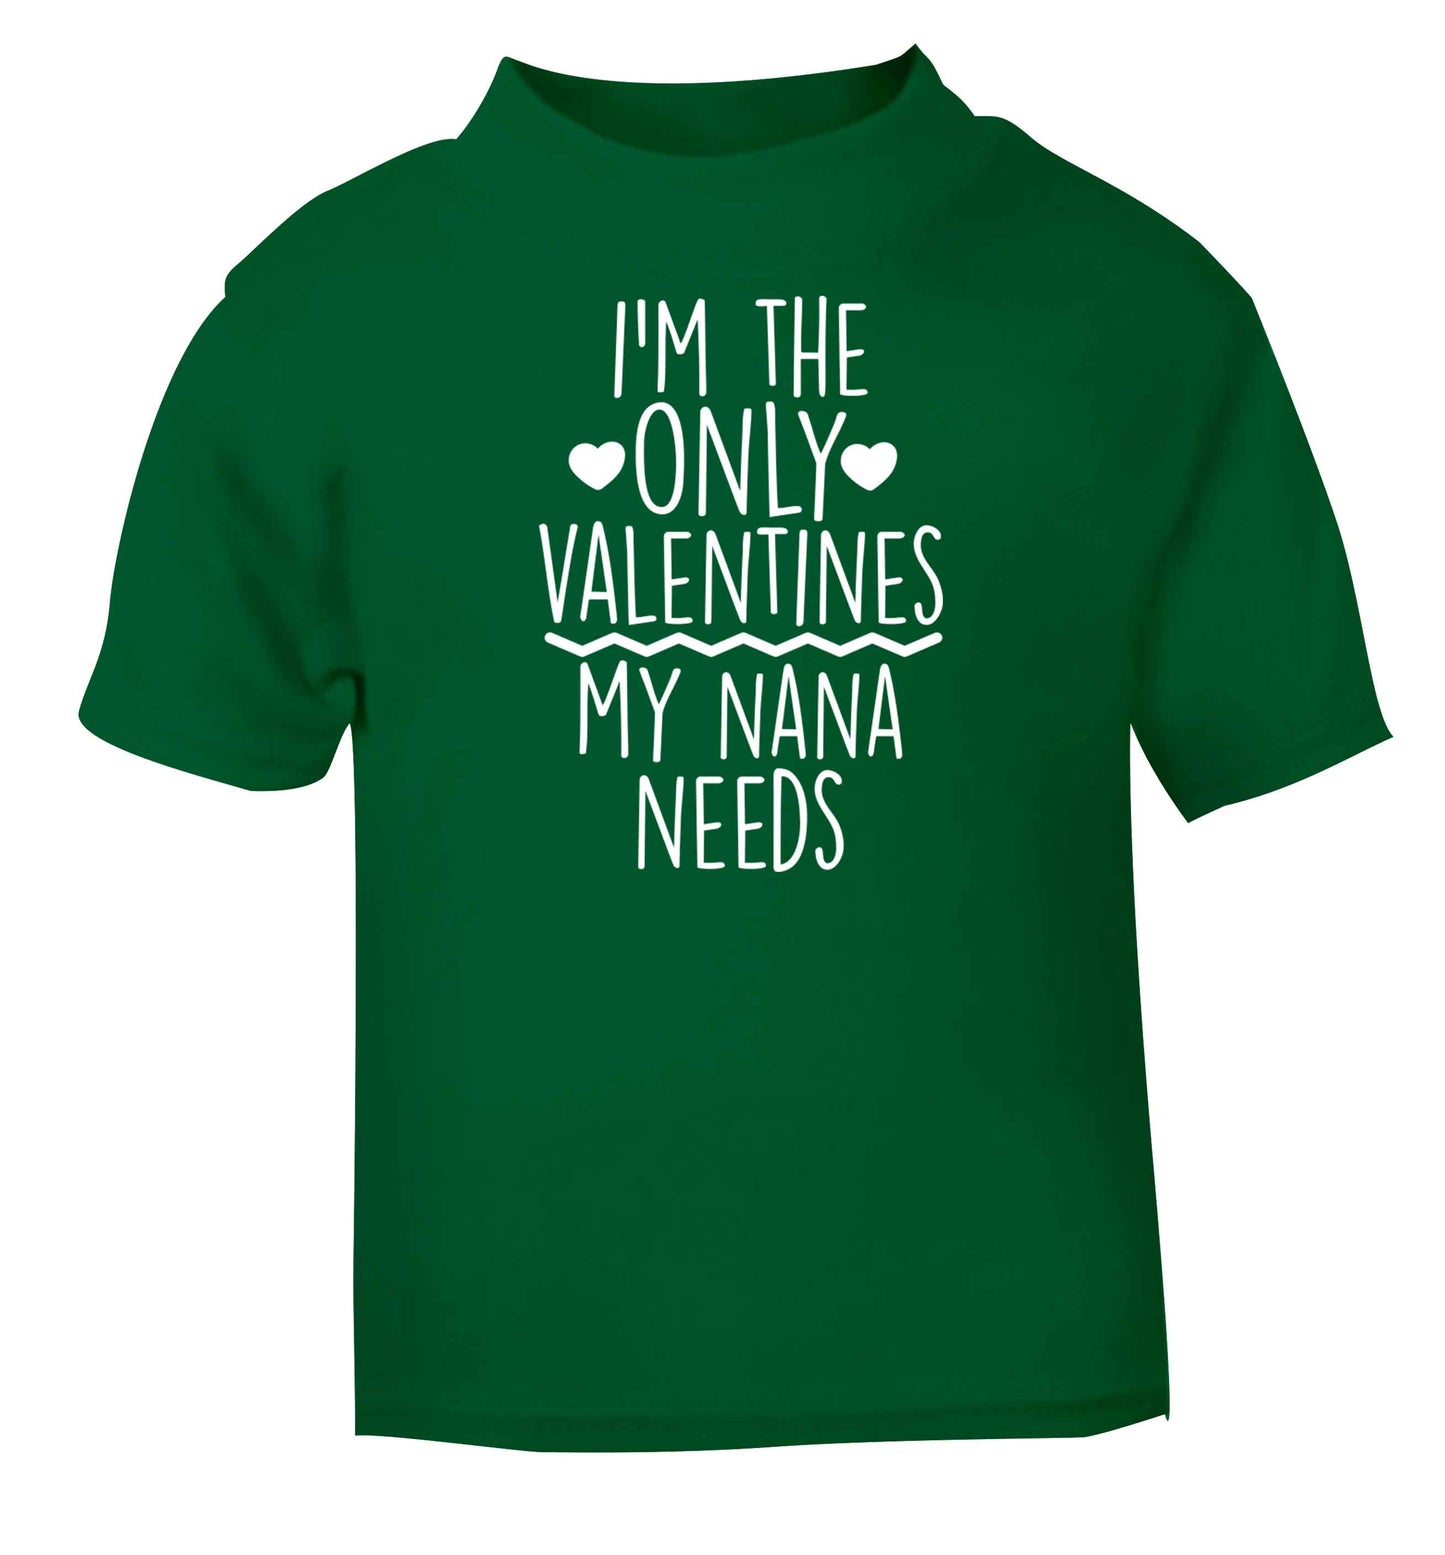 I'm the only valentines my nana needs green baby toddler Tshirt 2 Years